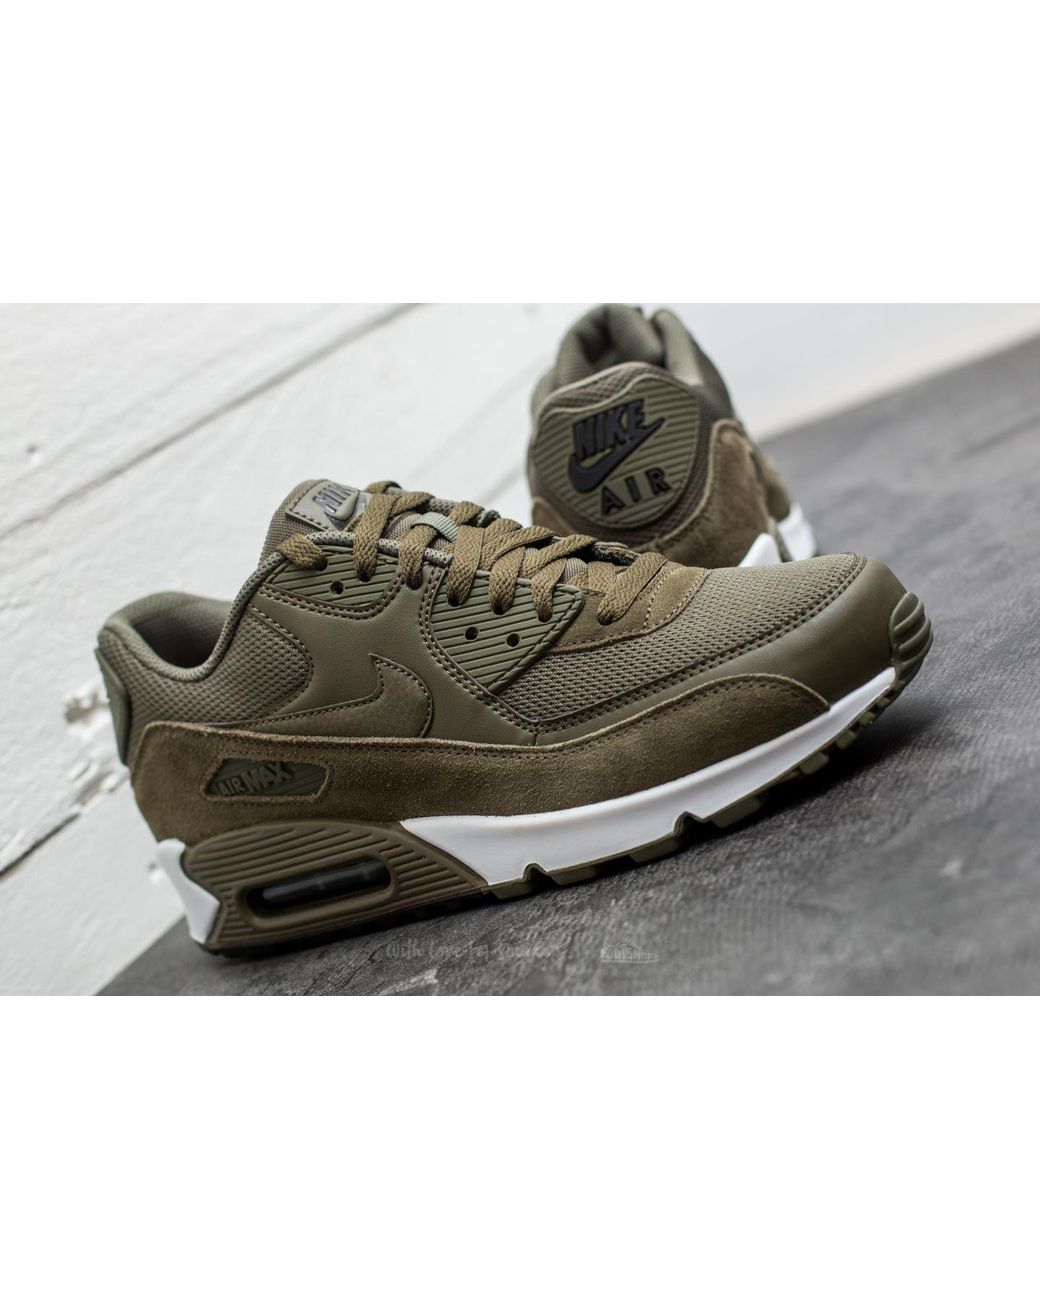 Nike Air Max 90 Olive Green And Black Wholesale Cheapest, 60% OFF |  megacoop.com